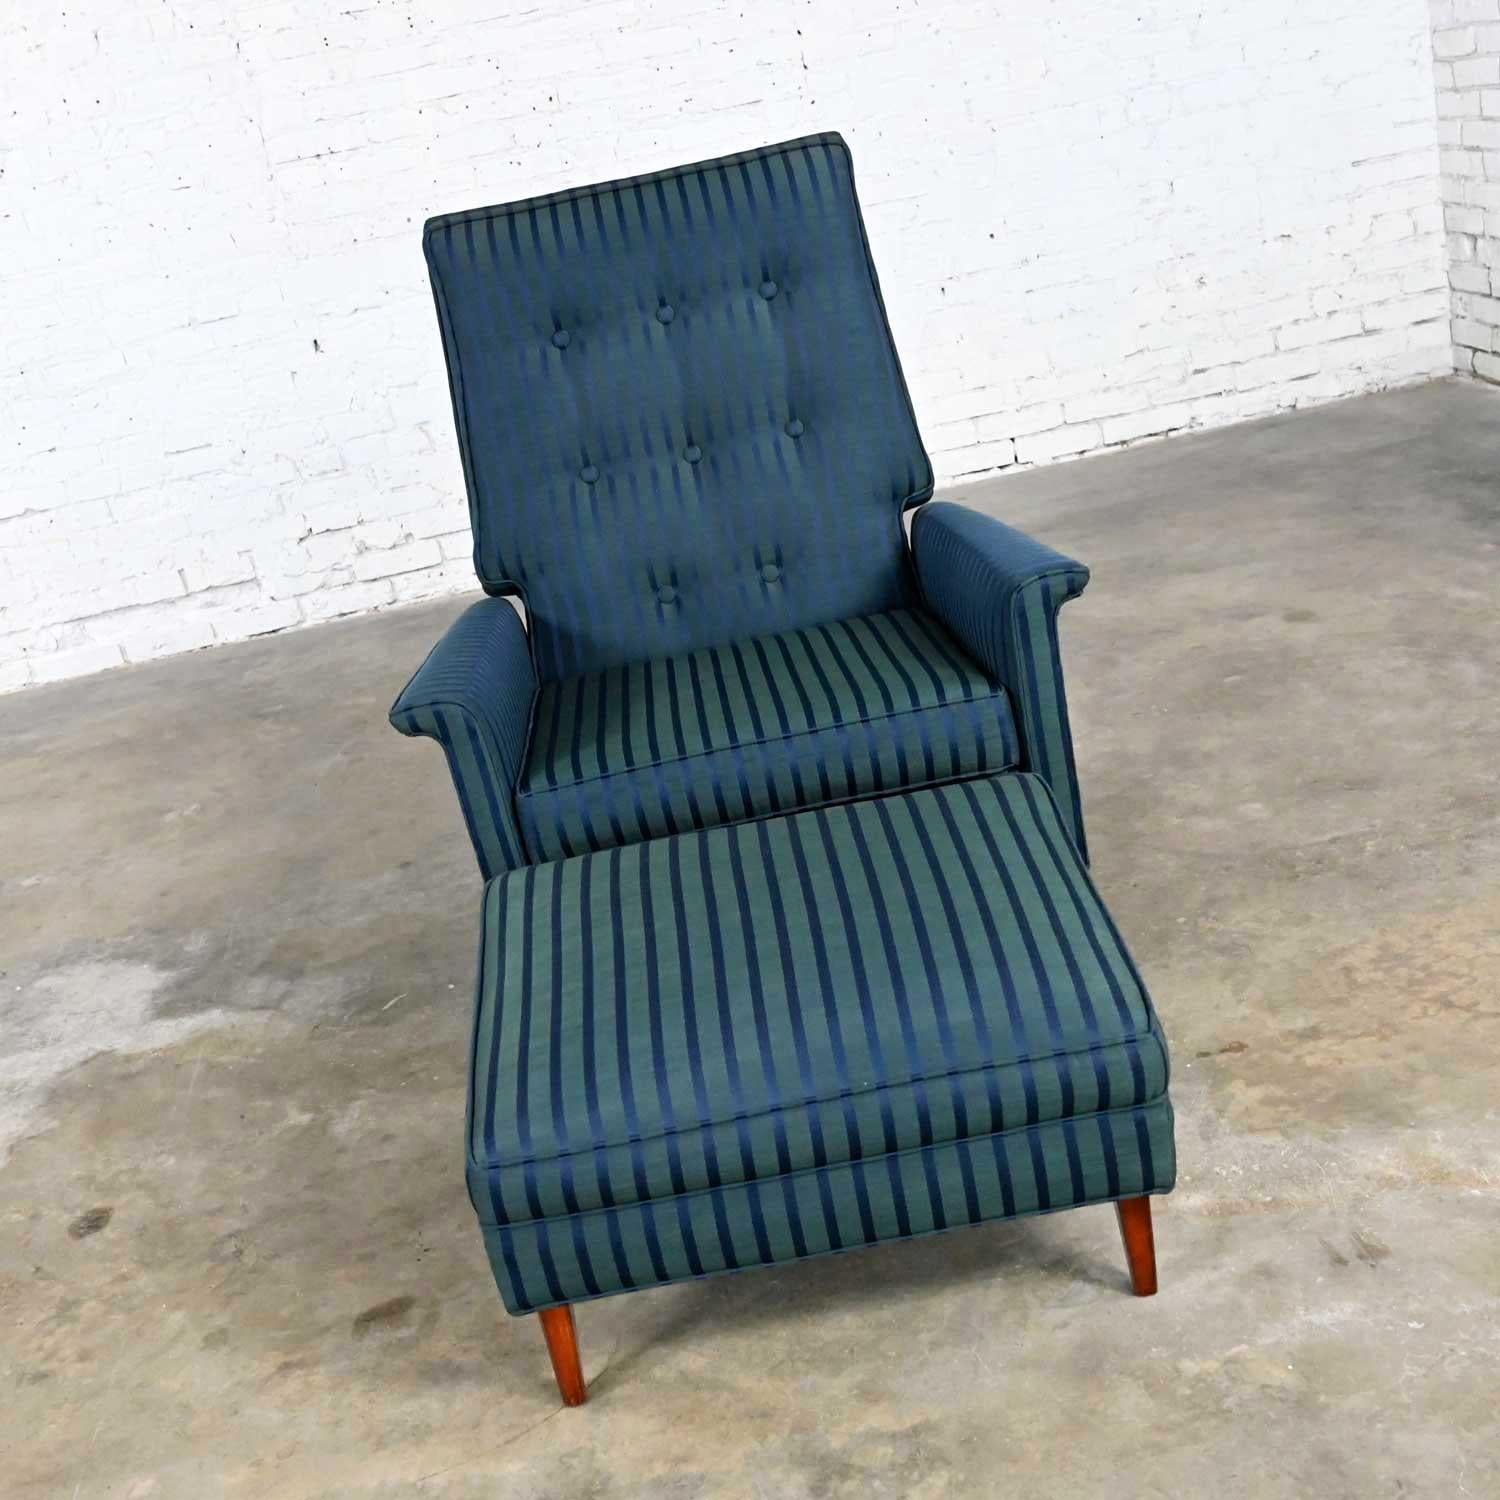 Fabulous vintage Mid-Century Modern tone on tone royal blue & iridescent green striped recliner and ottoman attributed to Selig Monroe chair. Beautiful condition, keeping in mind that this is vintage and not new so will have signs of use and wear.